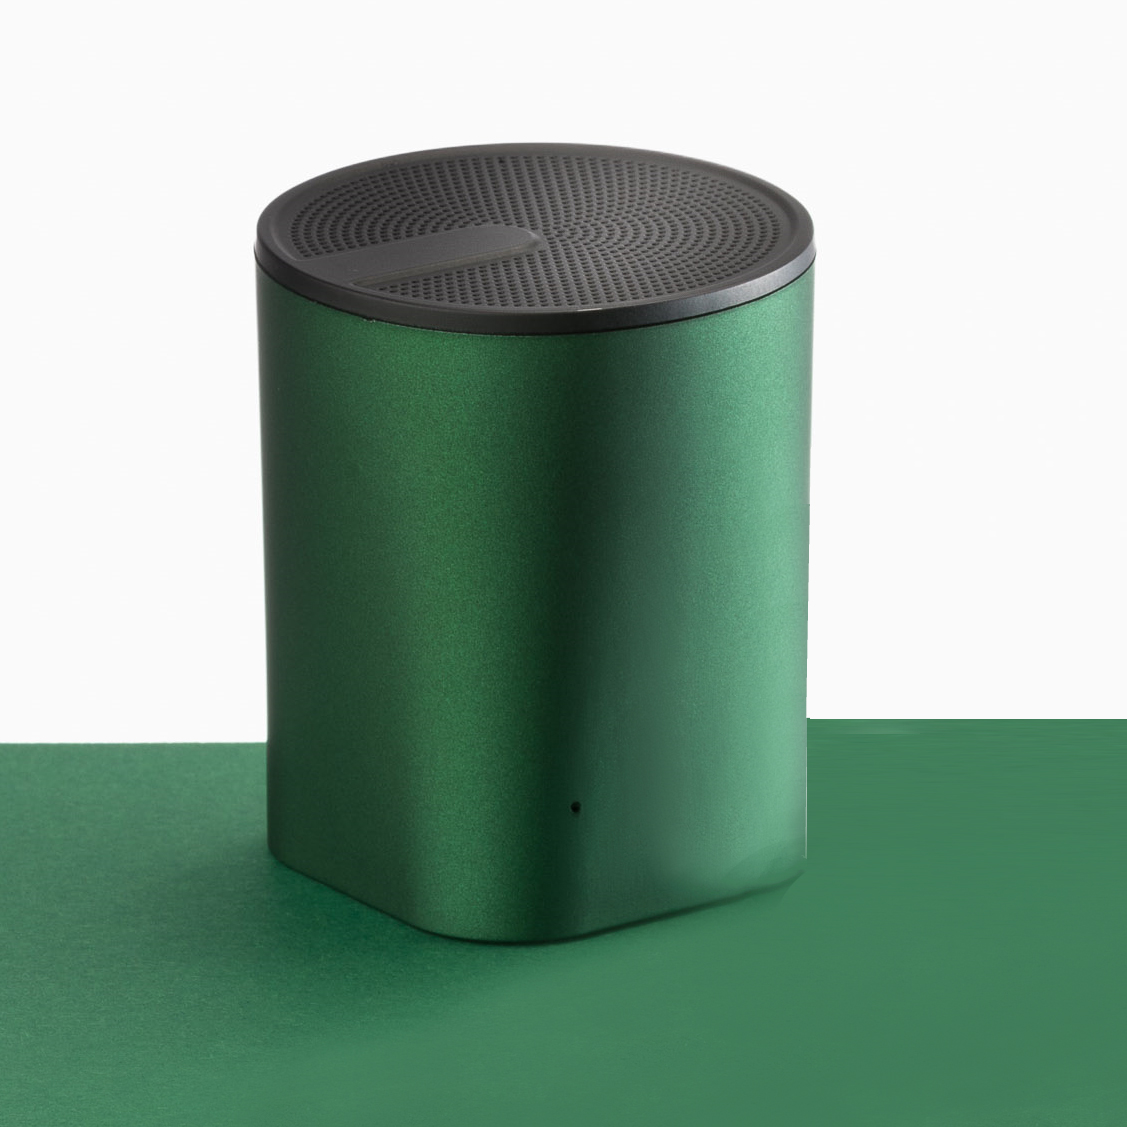 Green Colour Sound Compact Speaker 1